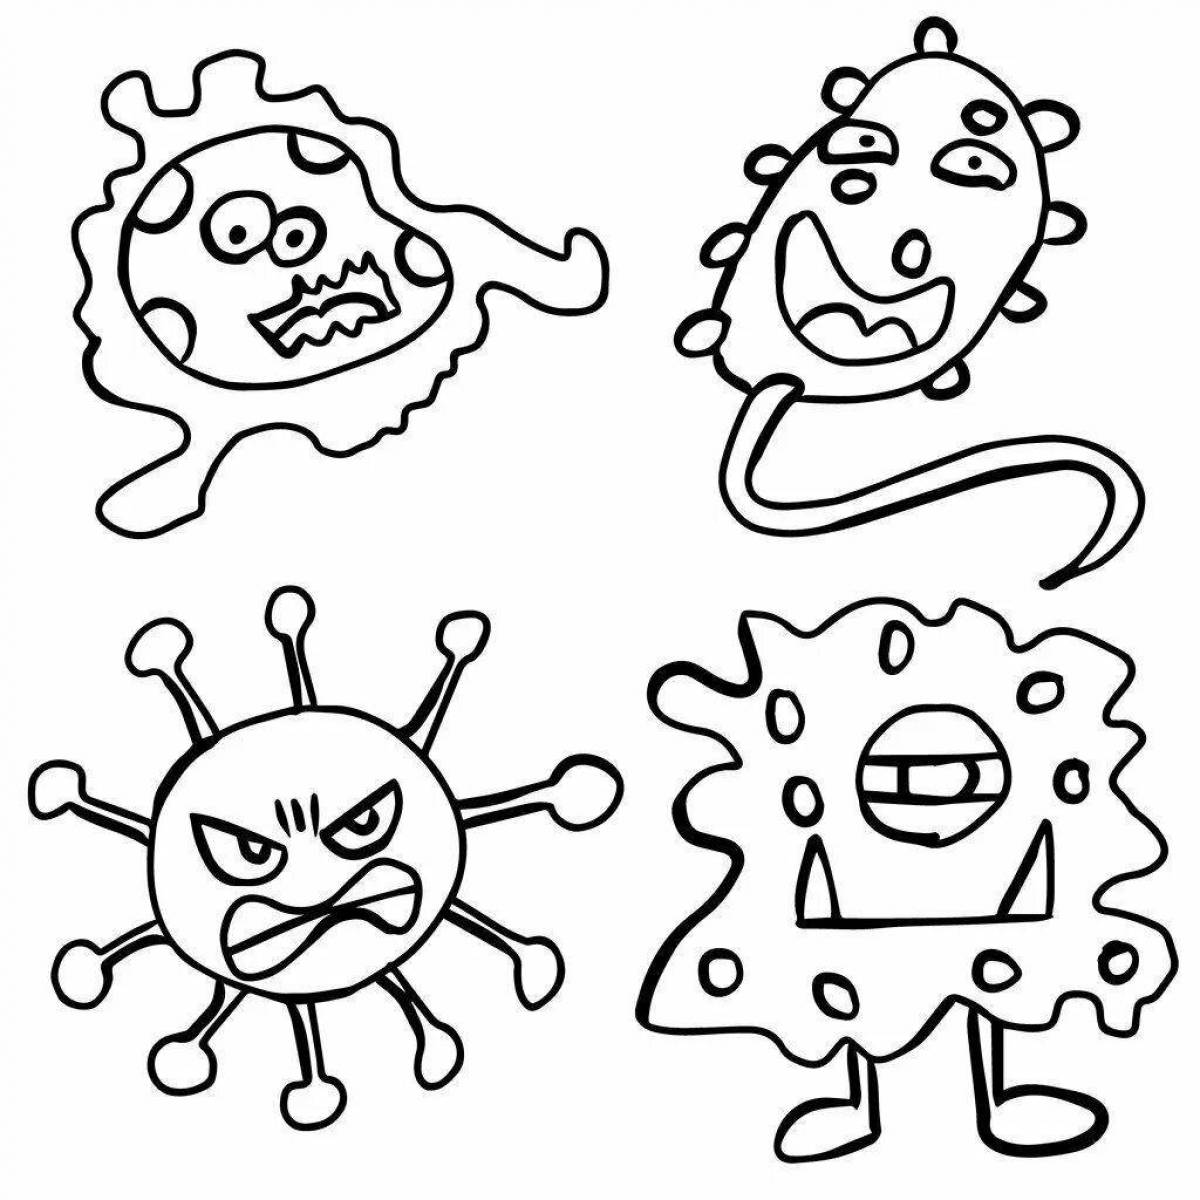 Germs for kids #7